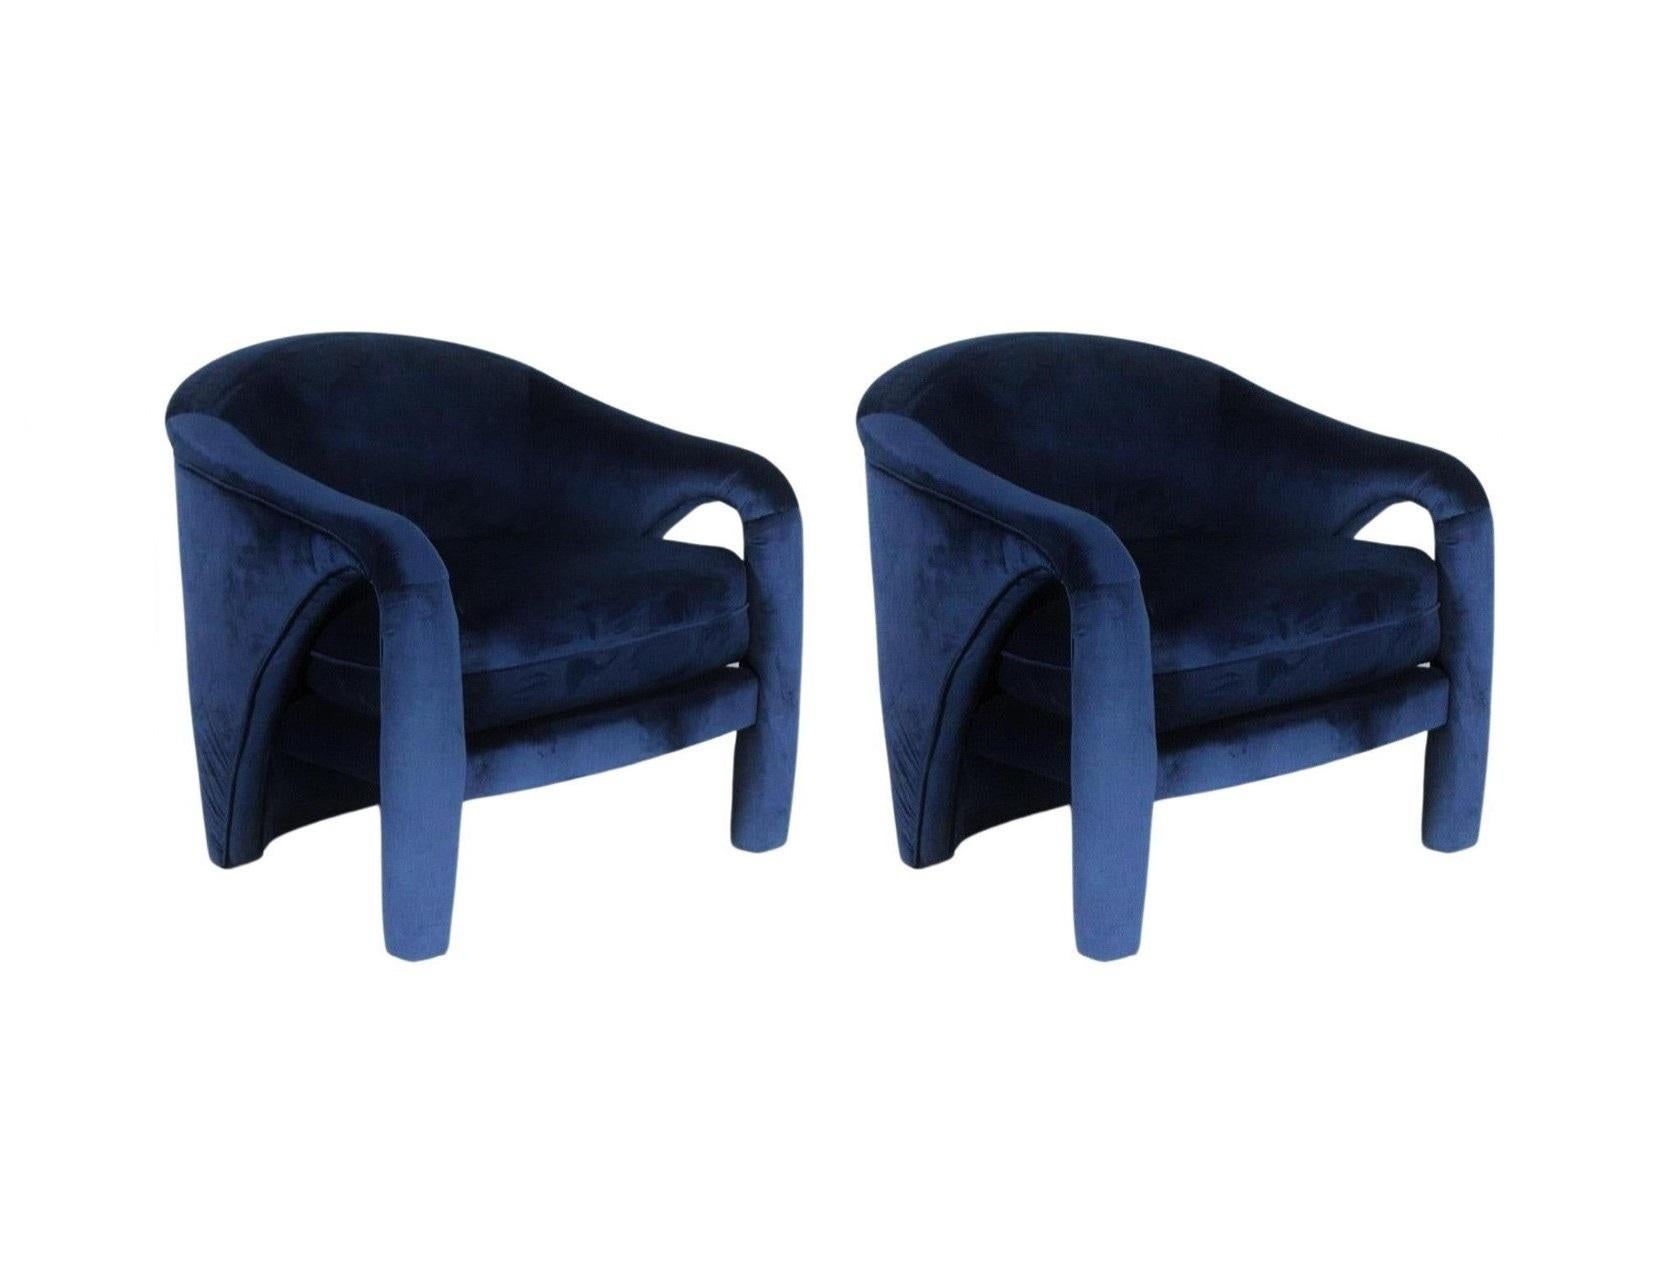 Late 20th Century Vladimir Kaganesque Navy Blue Lounge Chairs by Weiman For Sale